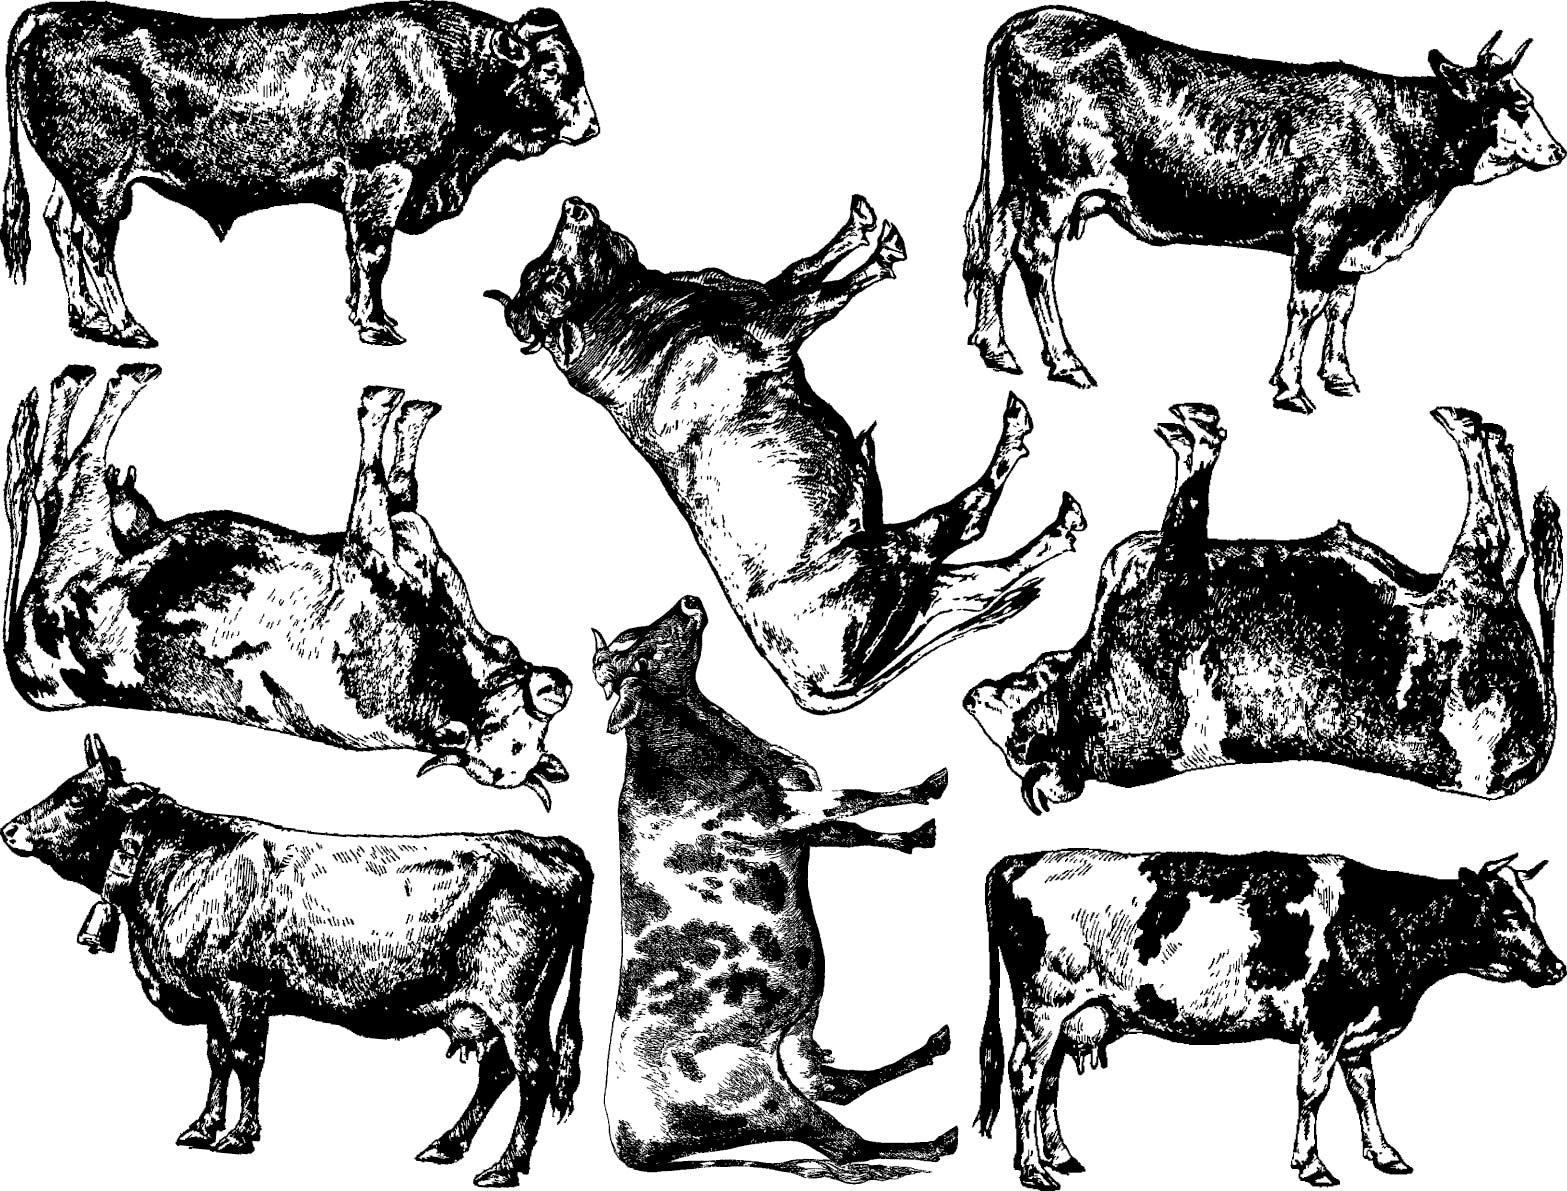 Images Enamel Decal to Choose from Ceramic Decal or Glass Fusing Decals 84145 Choose Either Ceramic 3 Different Size Sheet Waterslide Decal Hangin with My Heifers Glass Decal Enamel